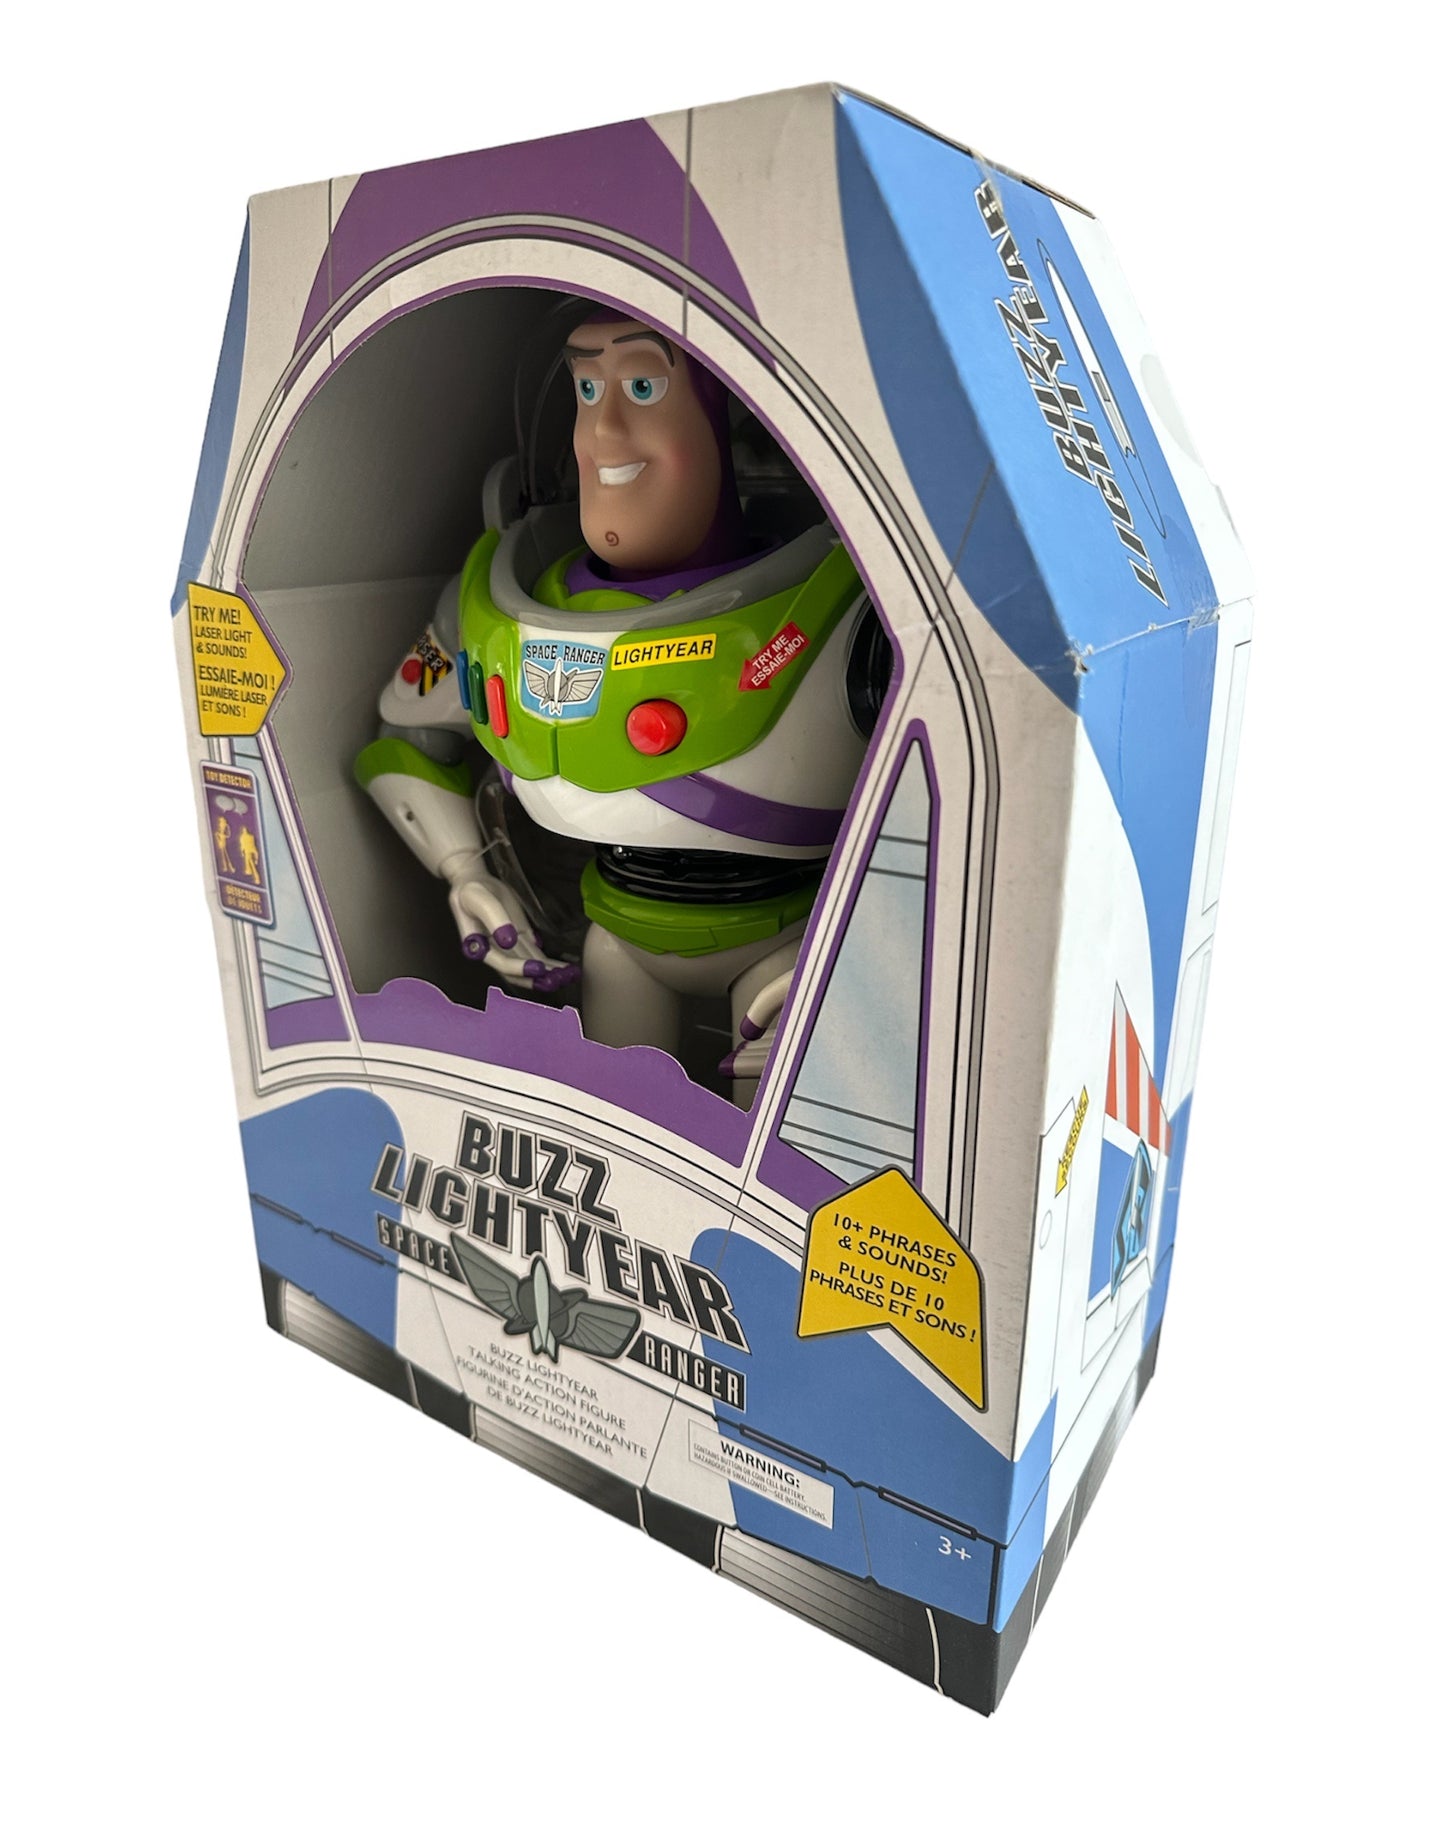 Disney's Electronic Buzz Lightyear Space Ranger 12" Talking Action Figure - Brand New Factory Sealed Shop Stock Room Find